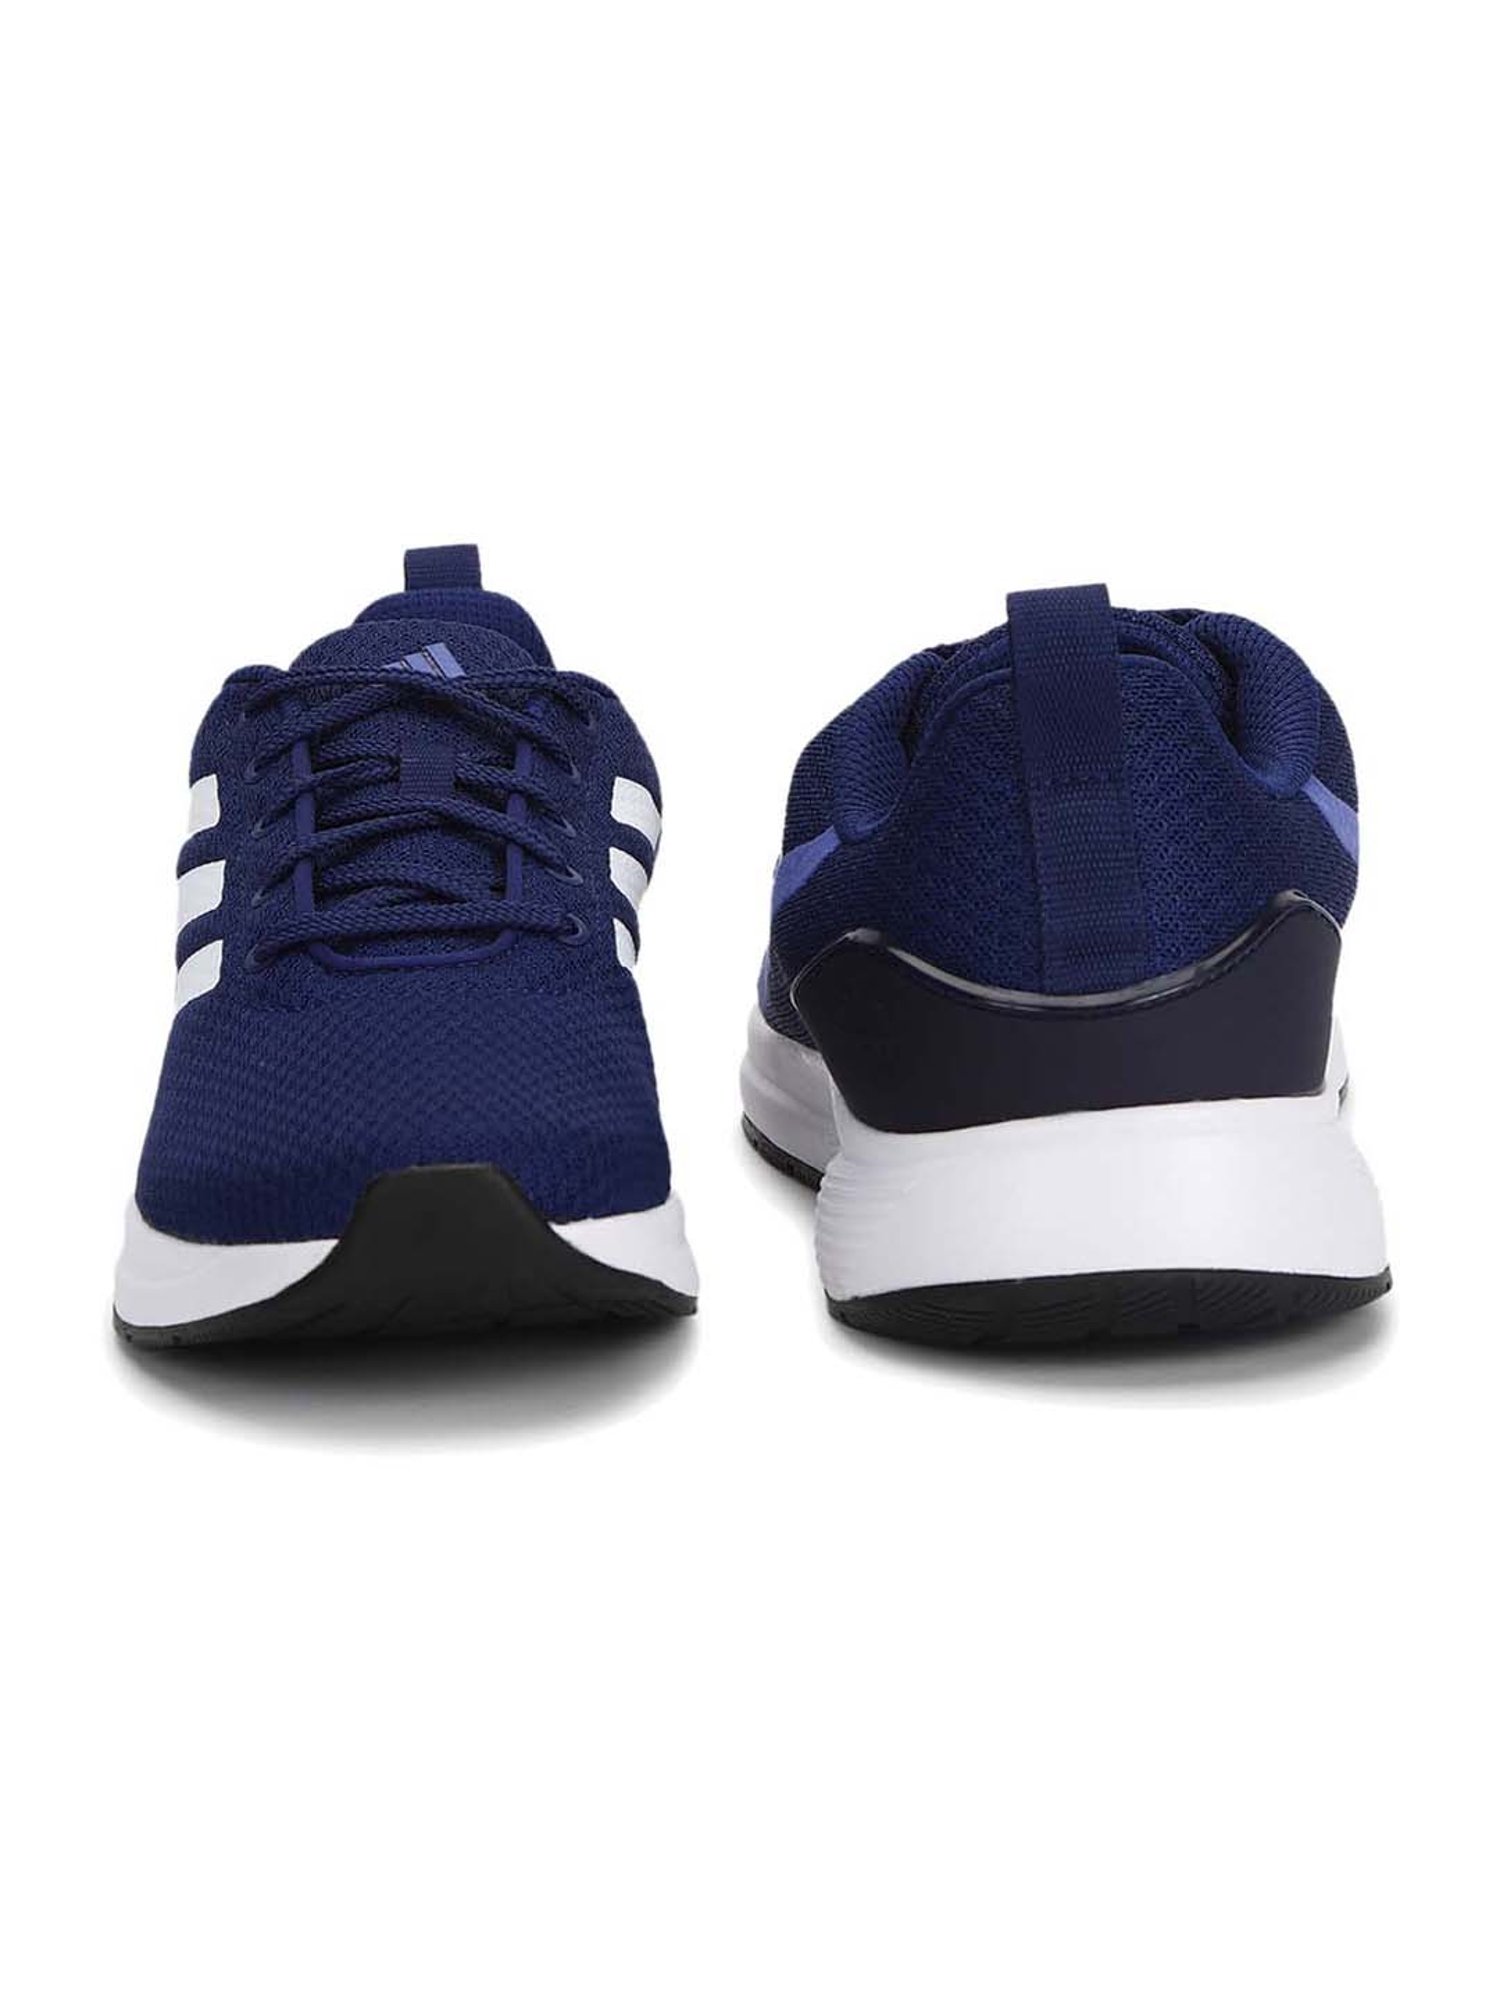 adidas pictor m running shoes